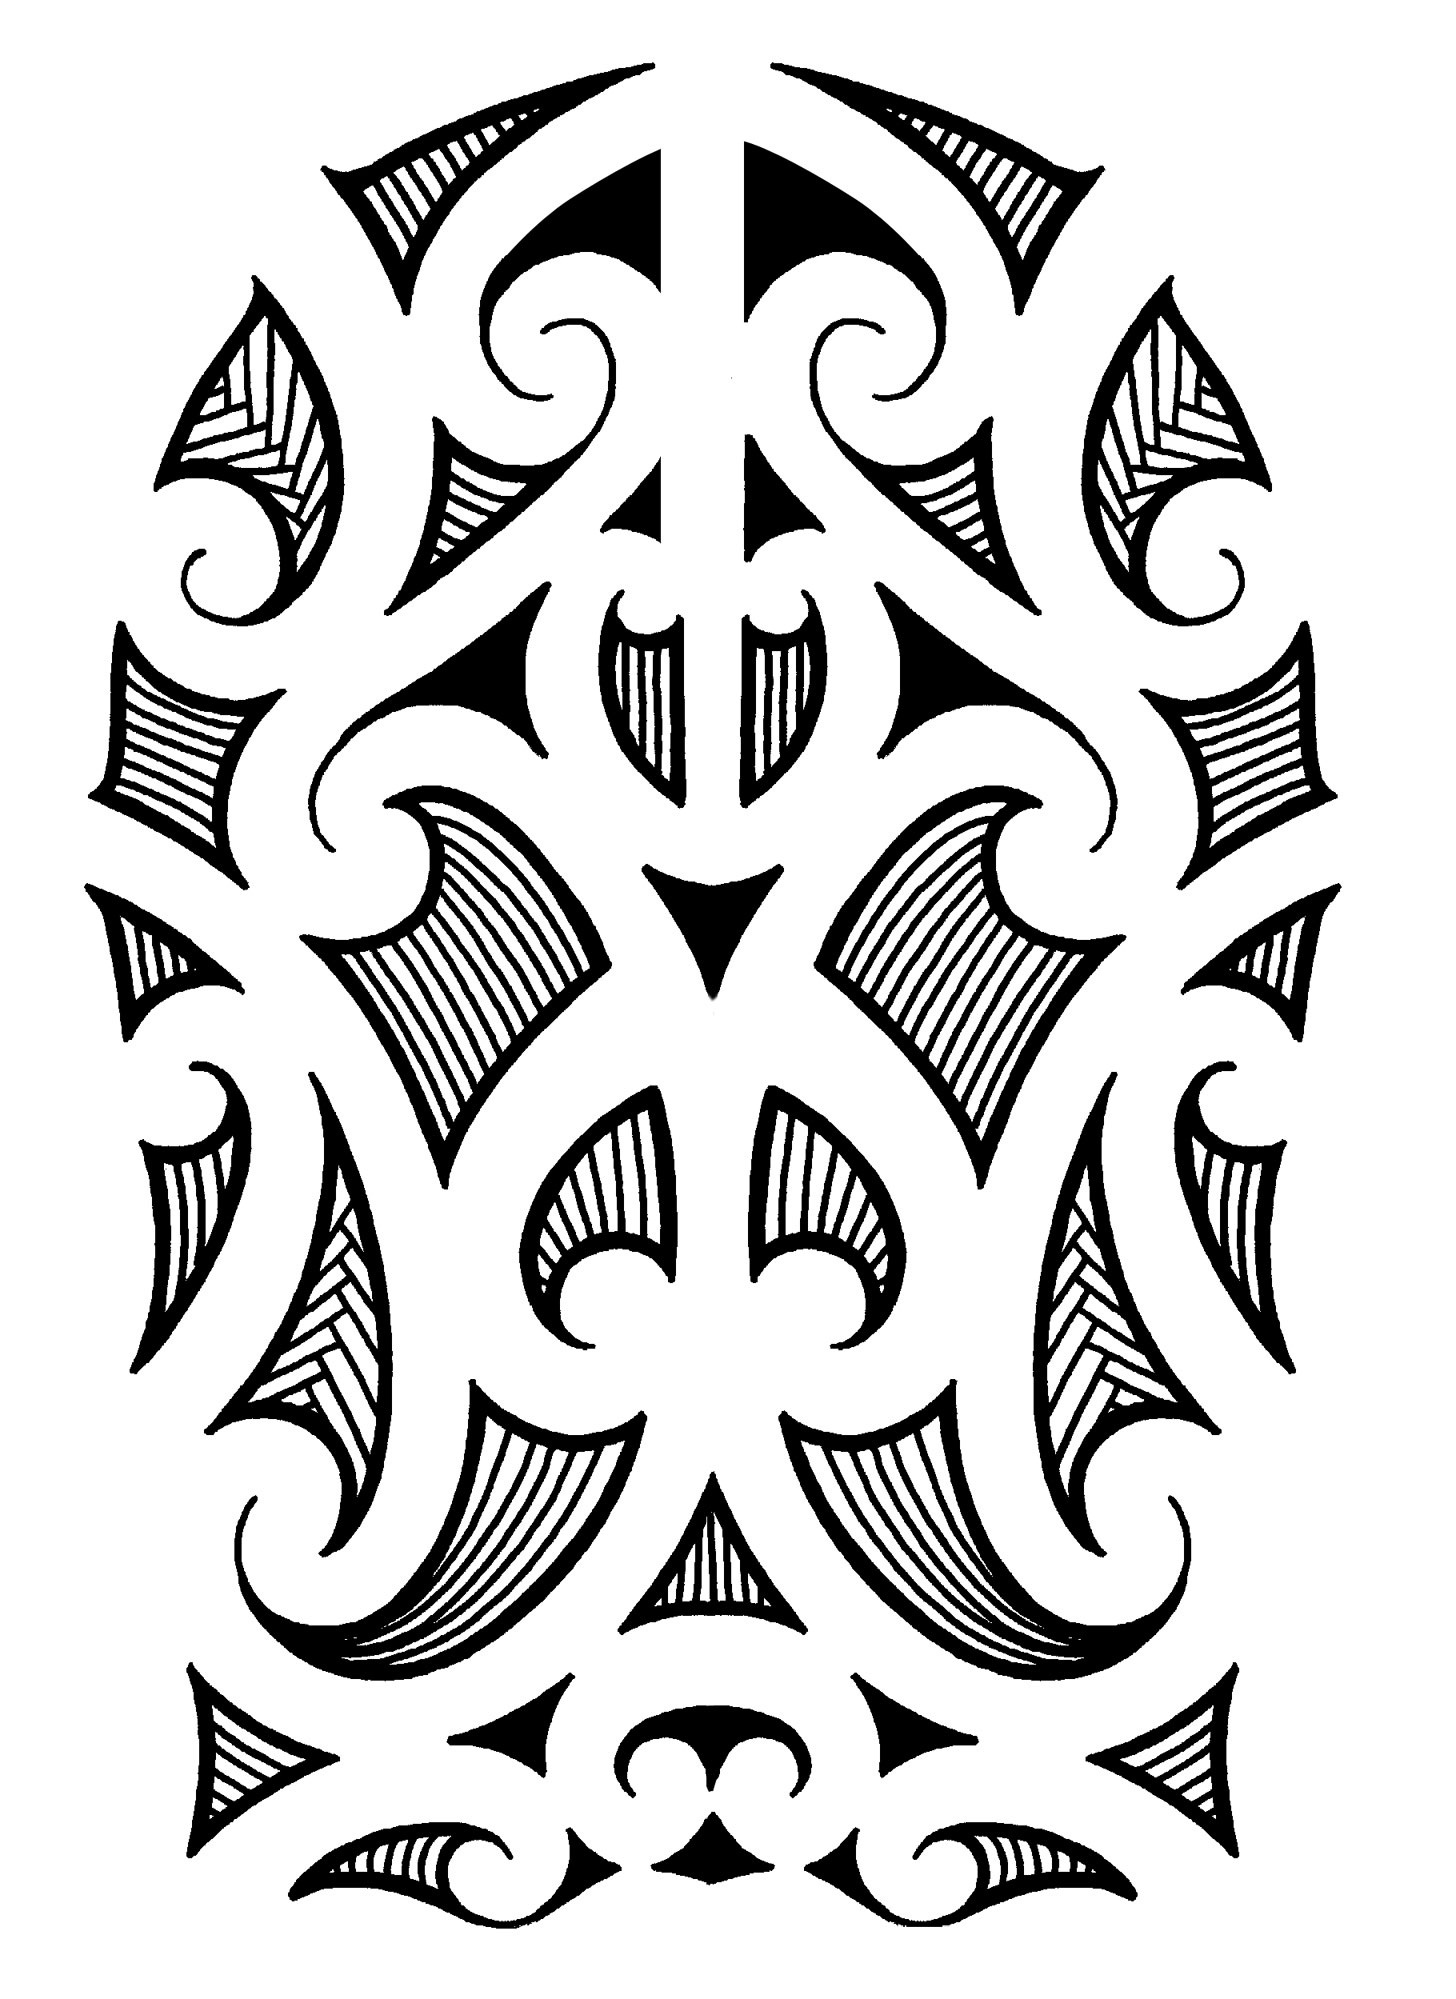 Samoan Tattoos Designs, Ideas and Meaning | Tattoos For You